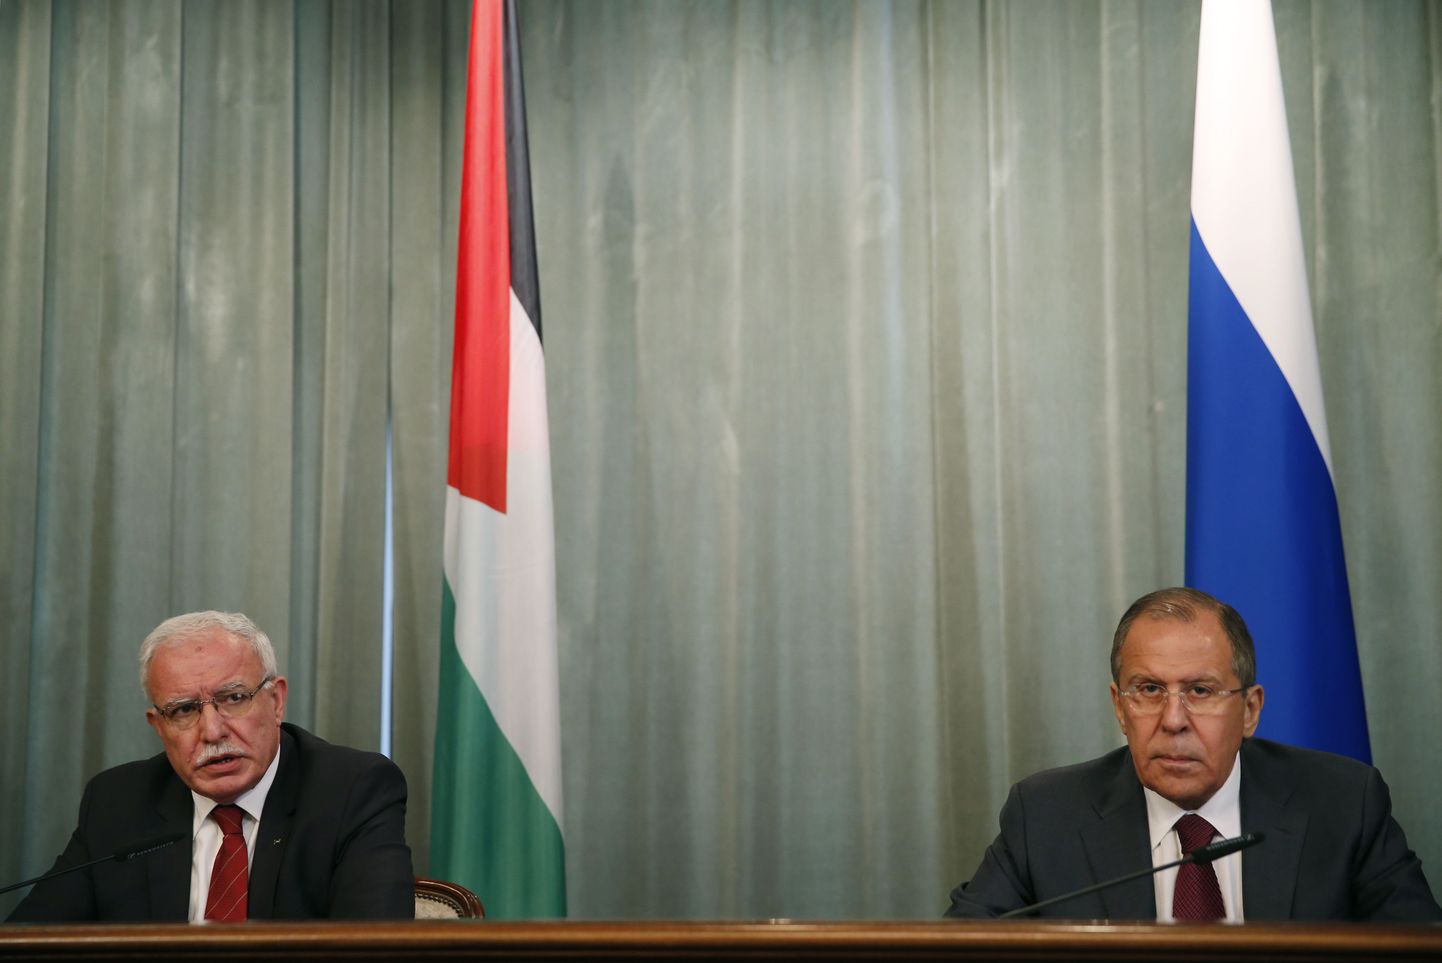 MOSCOW, RUSSIA - JUNE 8, 2016: Russia's Foreign Minister Sergei Lavrov (R) and Palestine's Foreign Minister Riyad al-Maliki give a joint press conference following their talks. Mikhail Japaridze/TASS